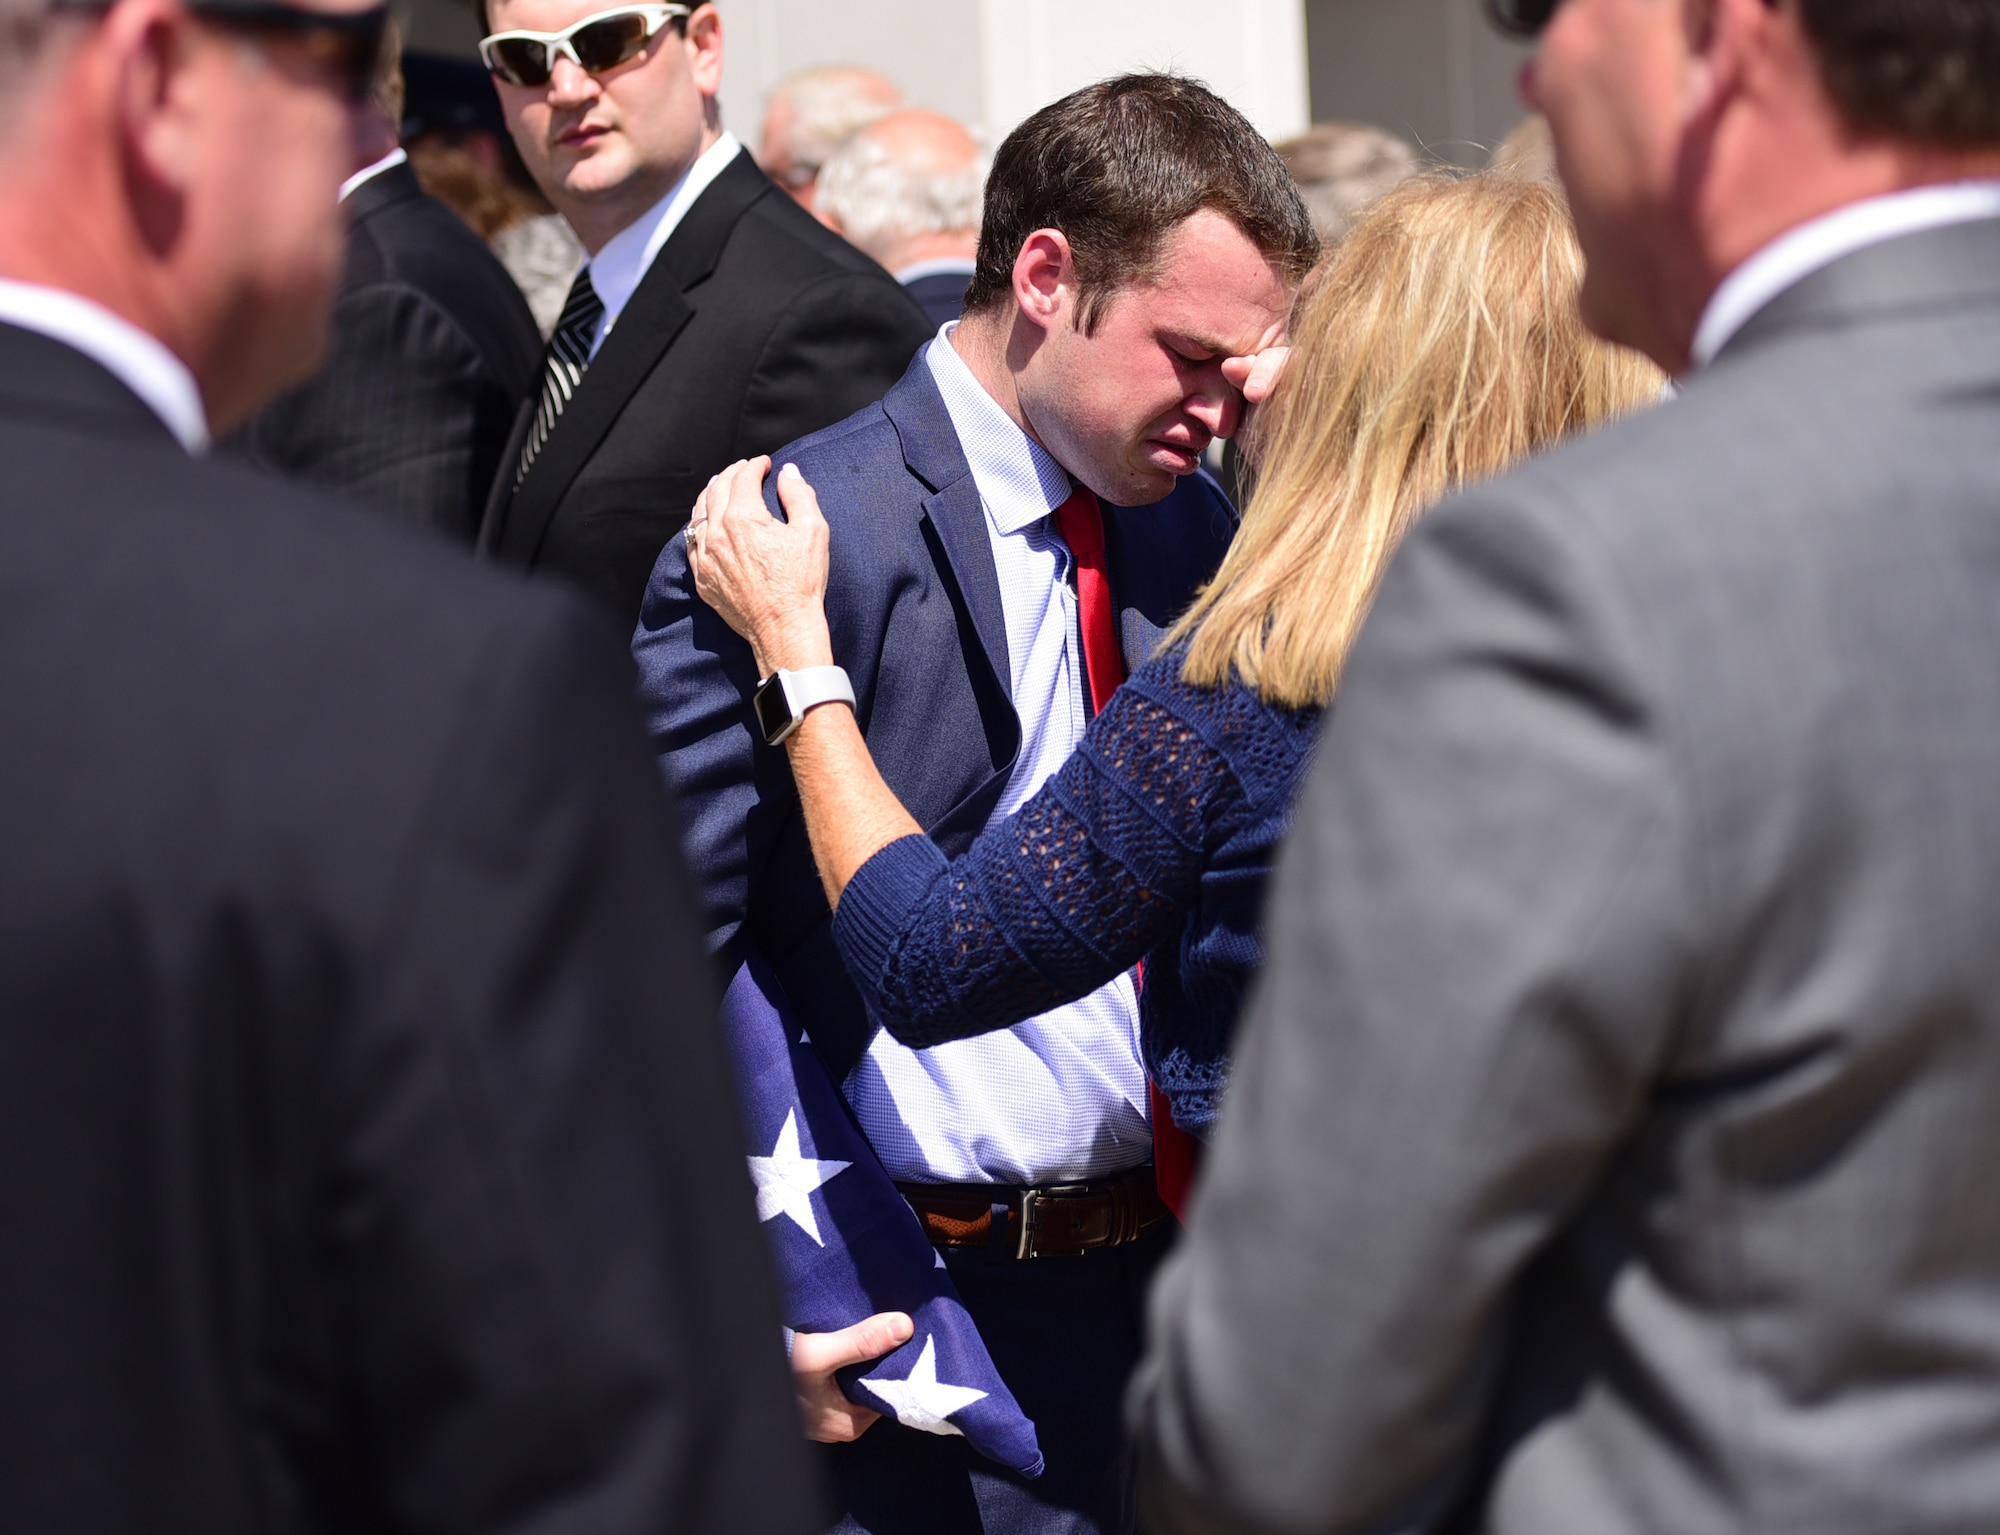 Matt Davis, grandson of Col. Edgar Davis embraces a family member after his grandfather’s funeral ceremony April 6, 2018, Goldsboro, North Carolina. After being shot down over Laos during the Vietnam War in 1968, a Laotian villager buried the remains. In 2015, the villager’s son reached out regarding the location of the remains. The Defense POW/MIA Accounting Agency recovered Davis’ remains in 2017. (U.S. Air Force photo by Senior Airman Christian Clausen)